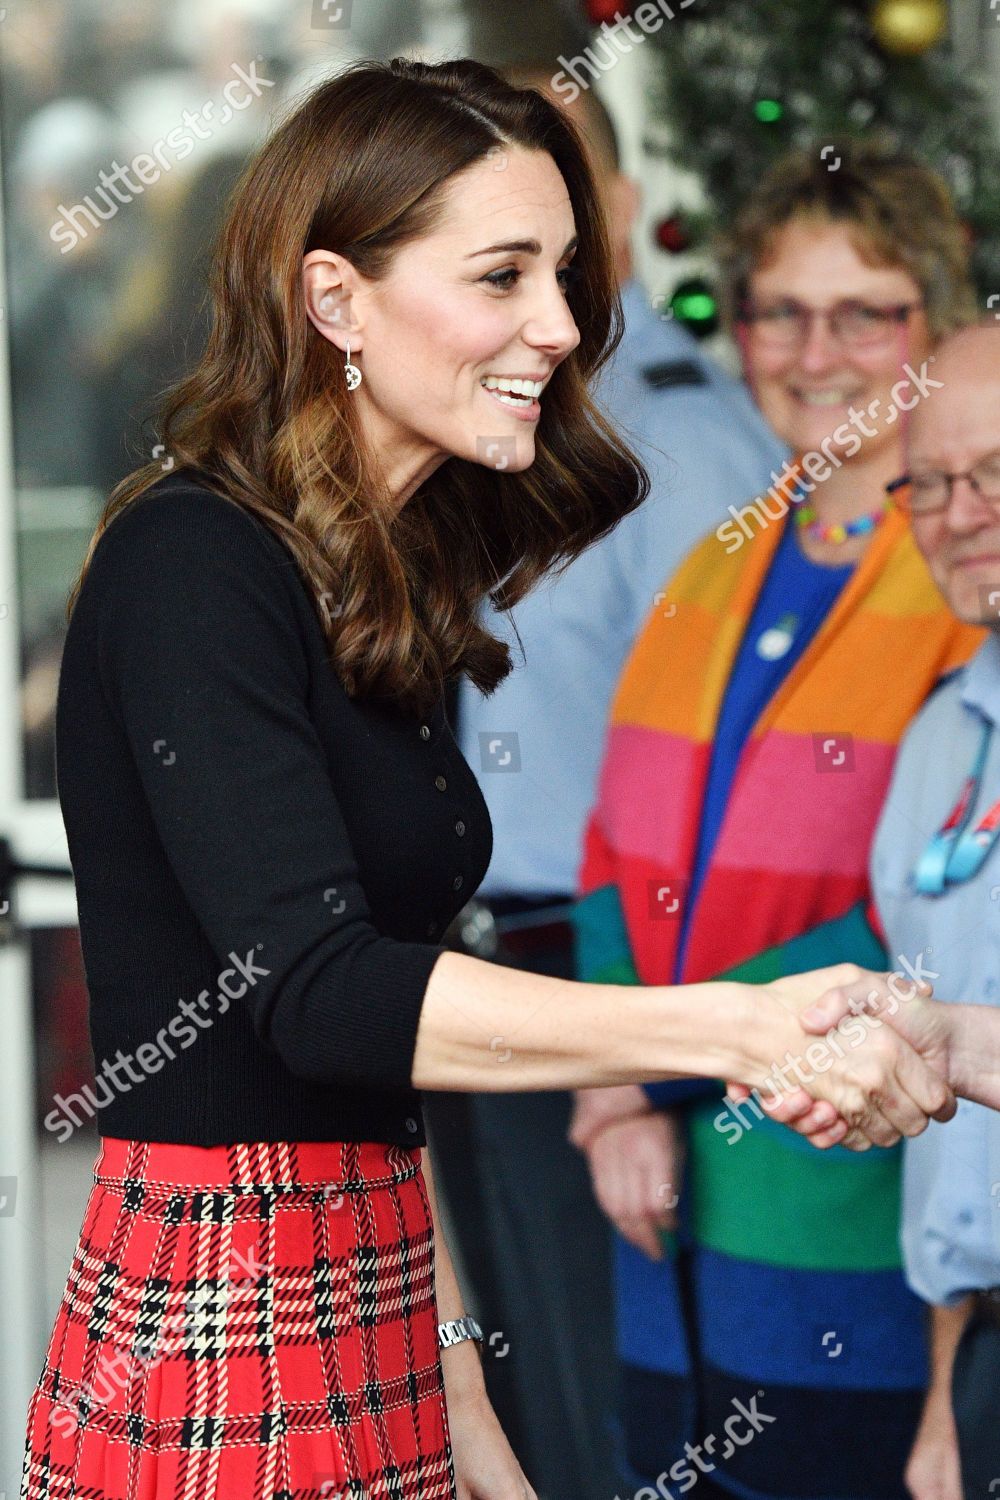 prince-william-and-catherine-duchess-of-cambridge-host-lunch-for-military-personnel-london-uk-shutterstock-editorial-10013427ax.jpg